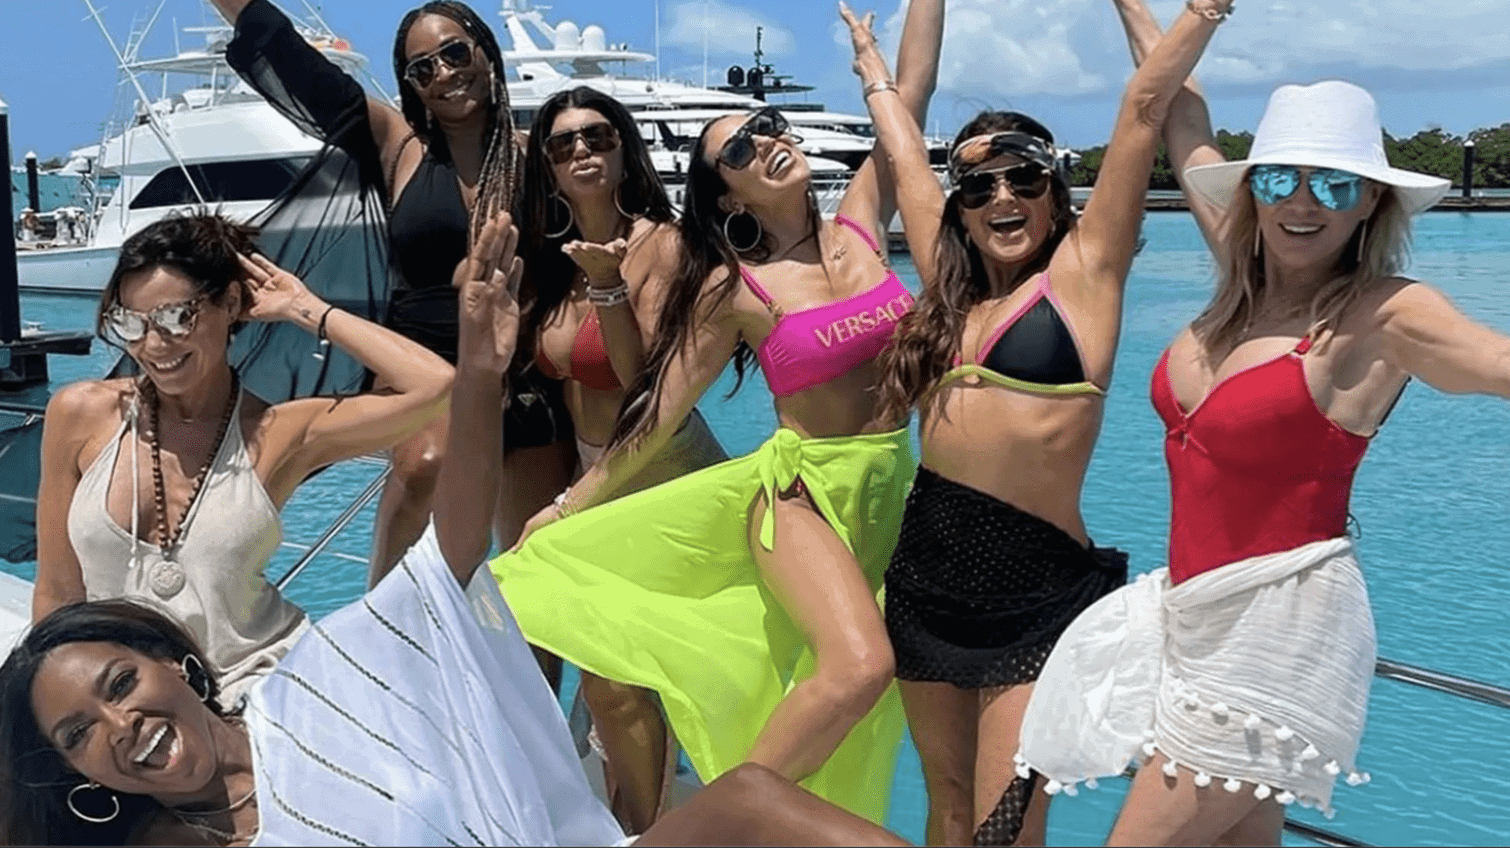 Seven women pose in swimwear and cover-ups and face the camera, raising Champagne flutes in this image from Shed Media.